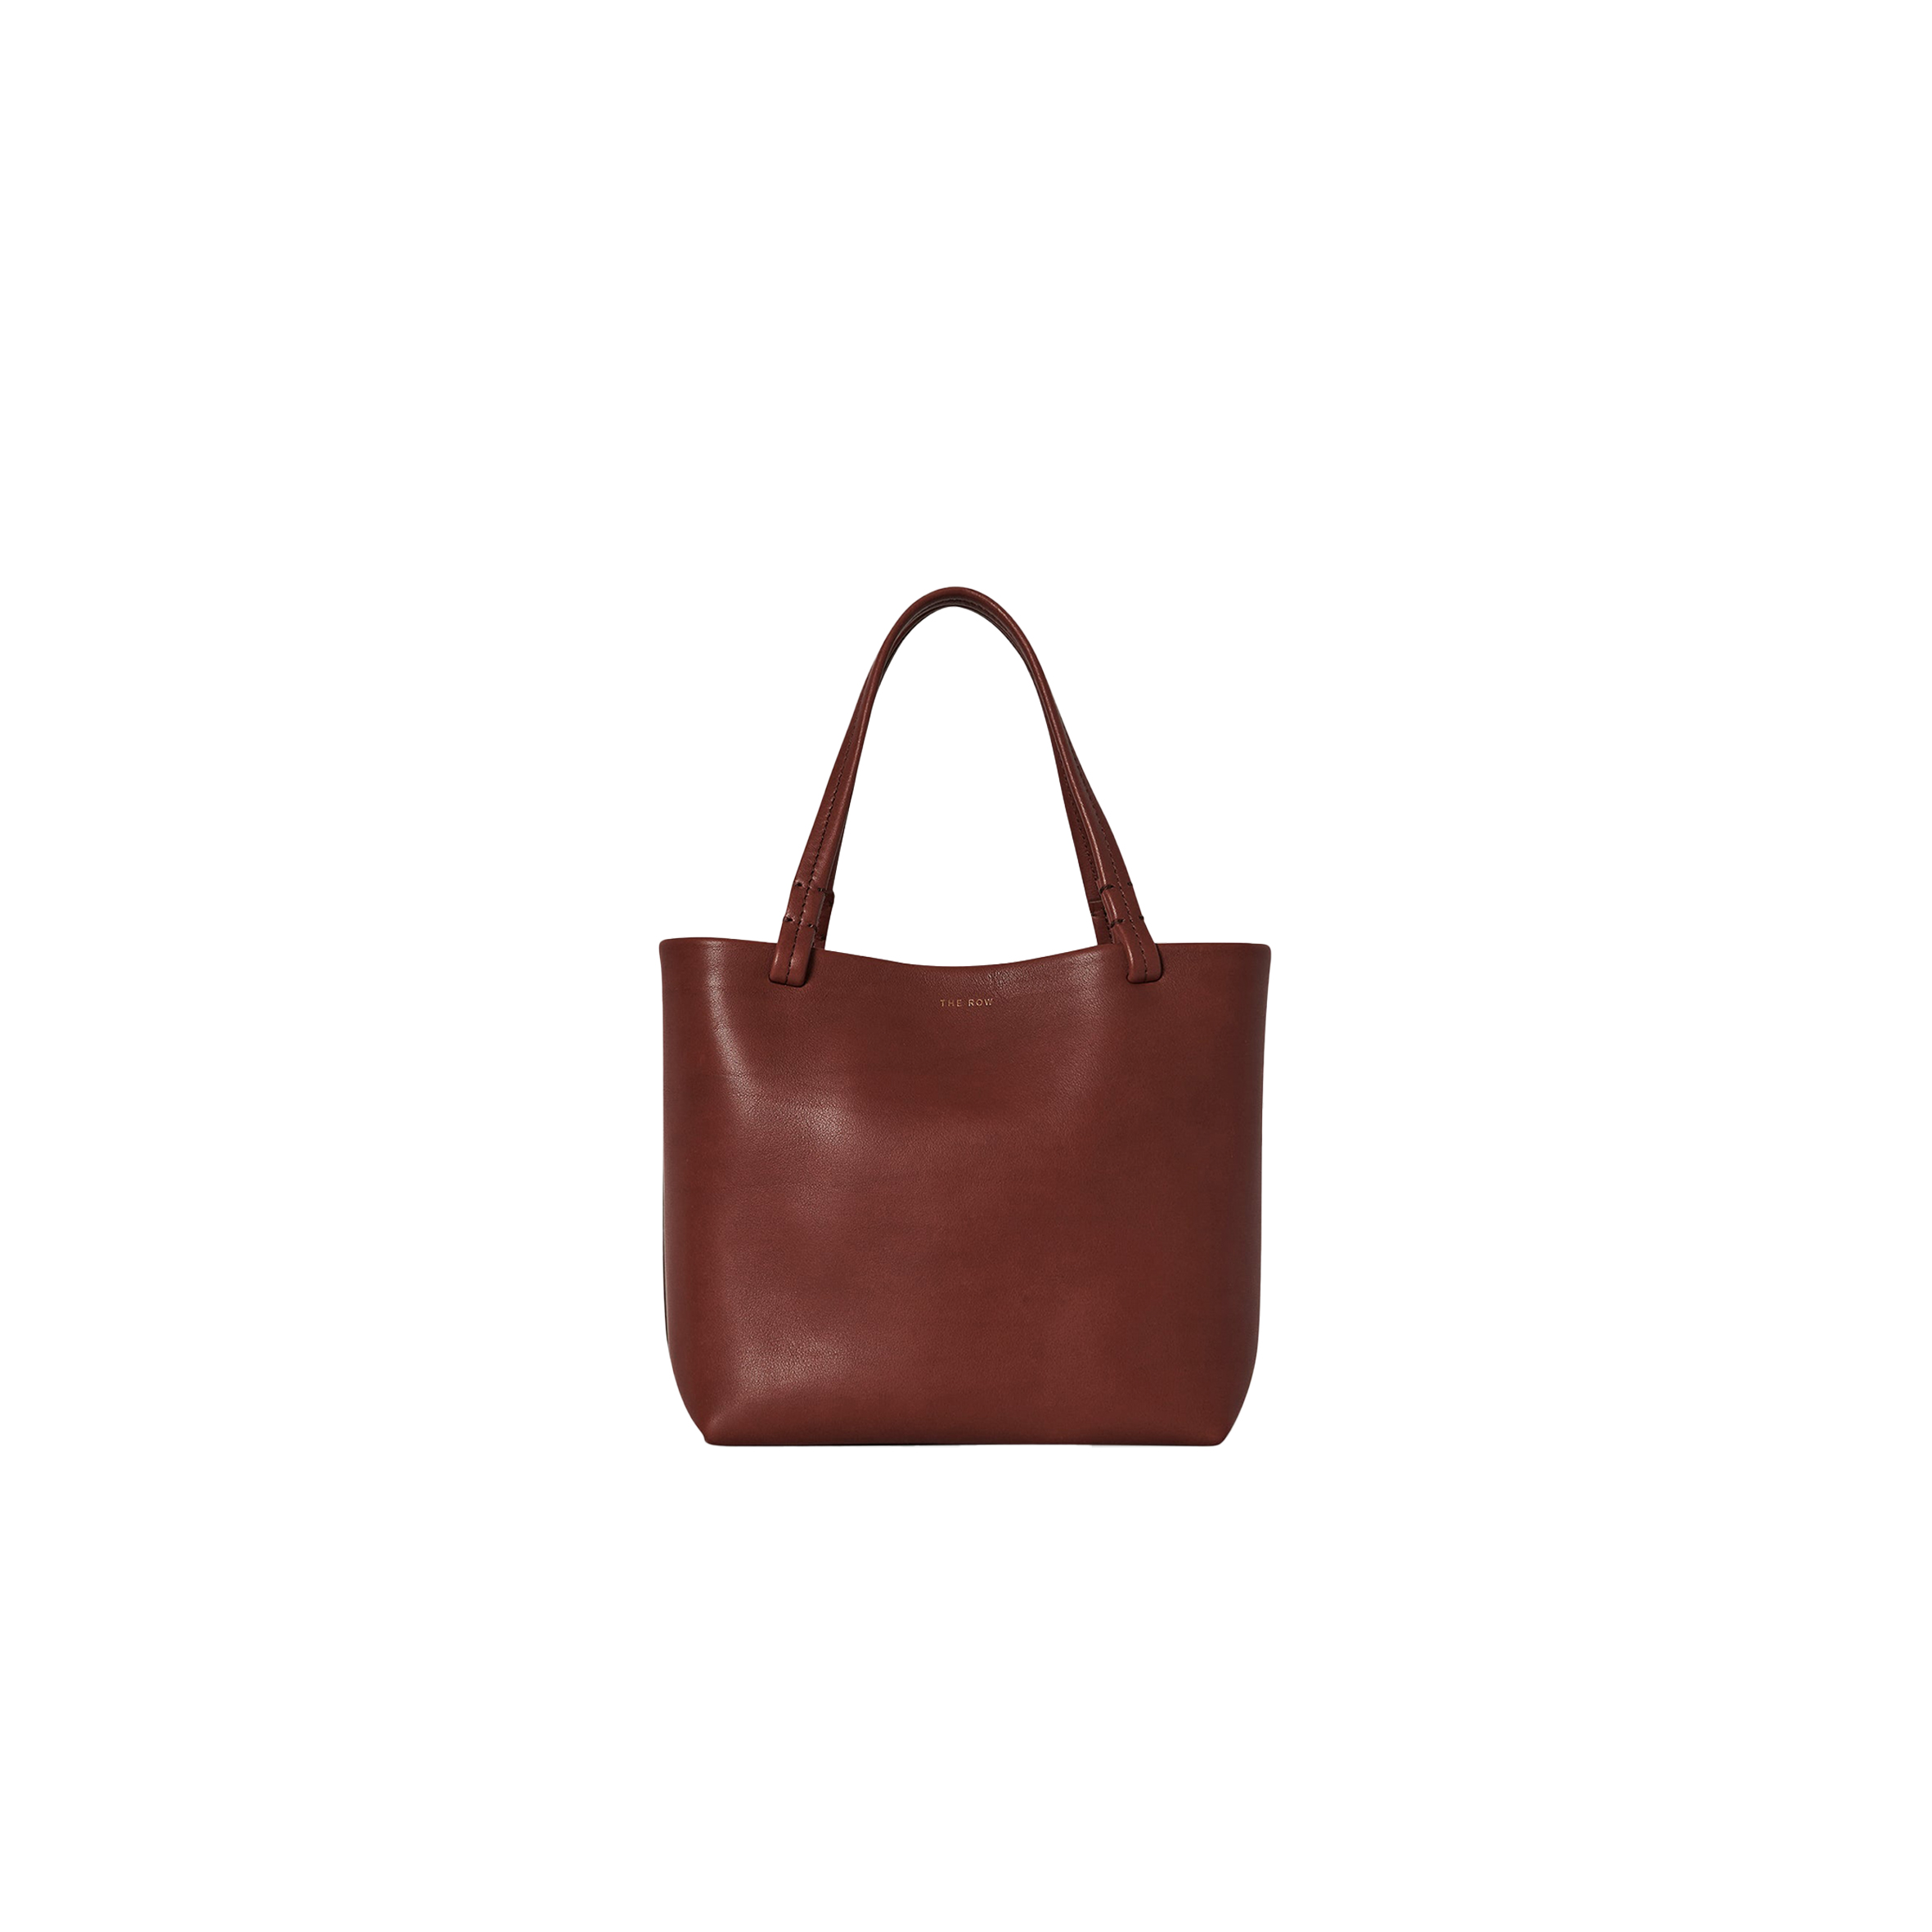 THE ROWSMALL PARK TOTE BAG IN LEATHER COGNAC W1199L72CGSG (18*29*10cm)